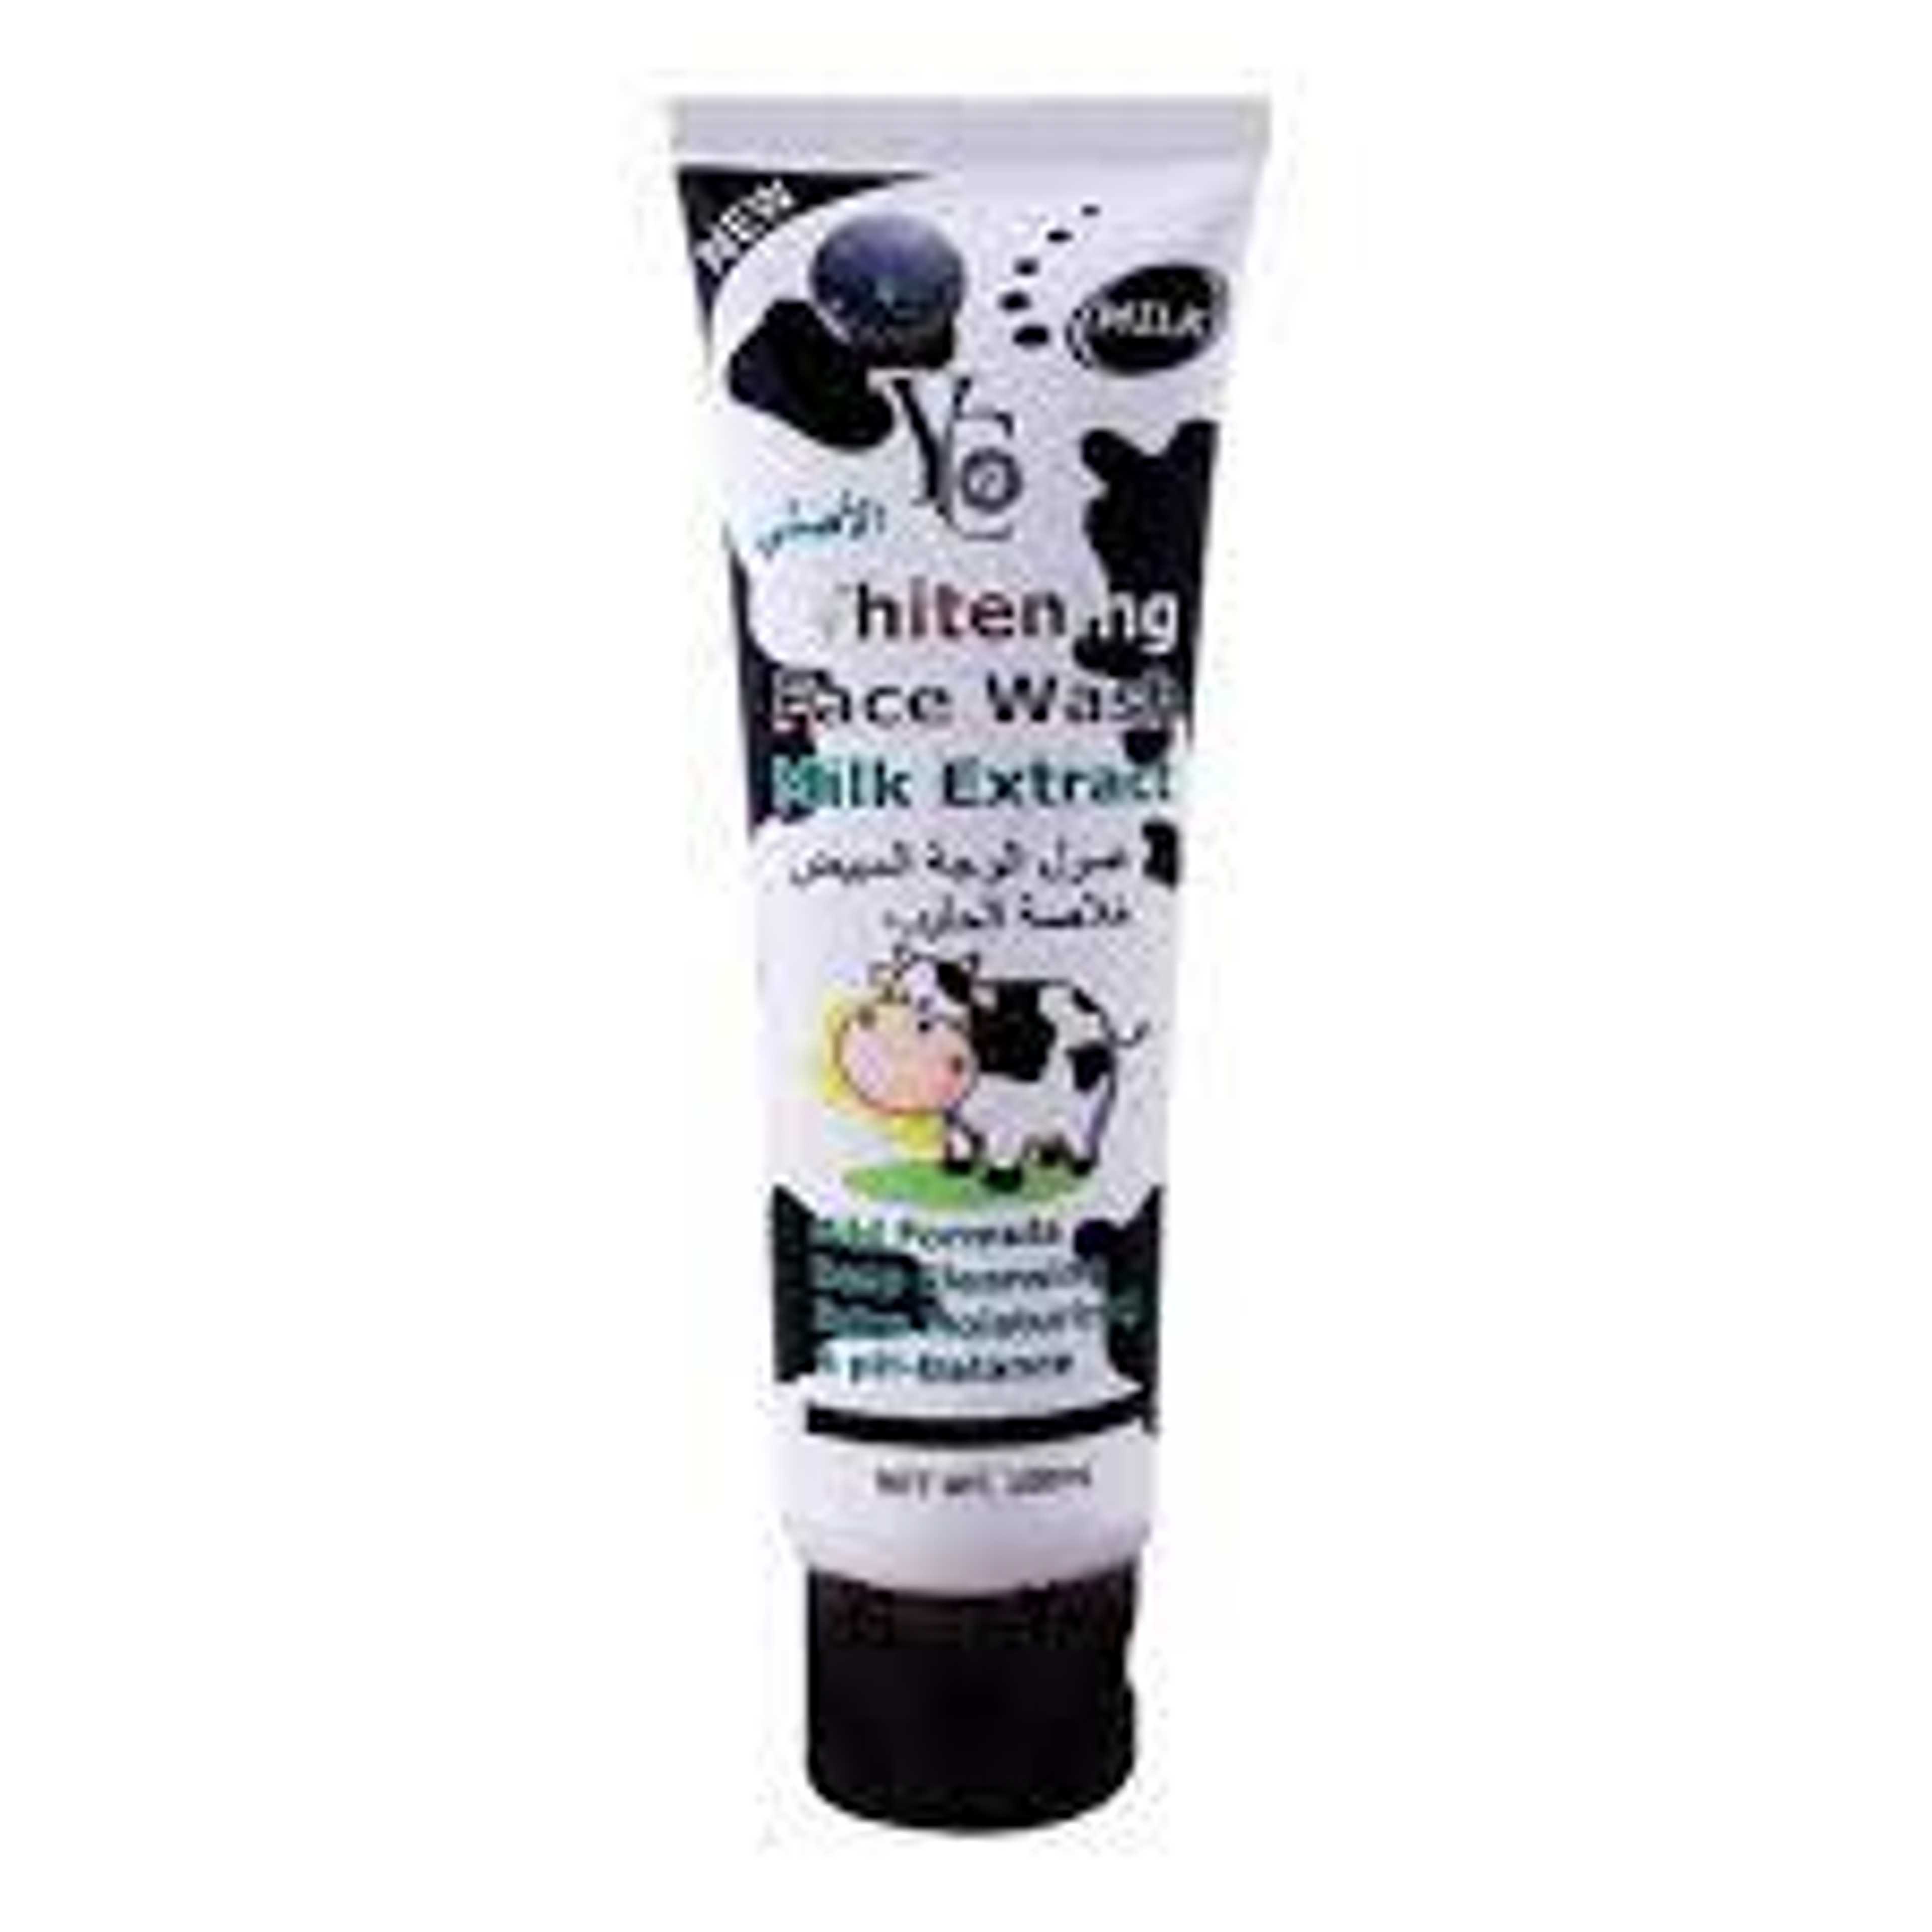 whitening face wash with milk extract 100ml 